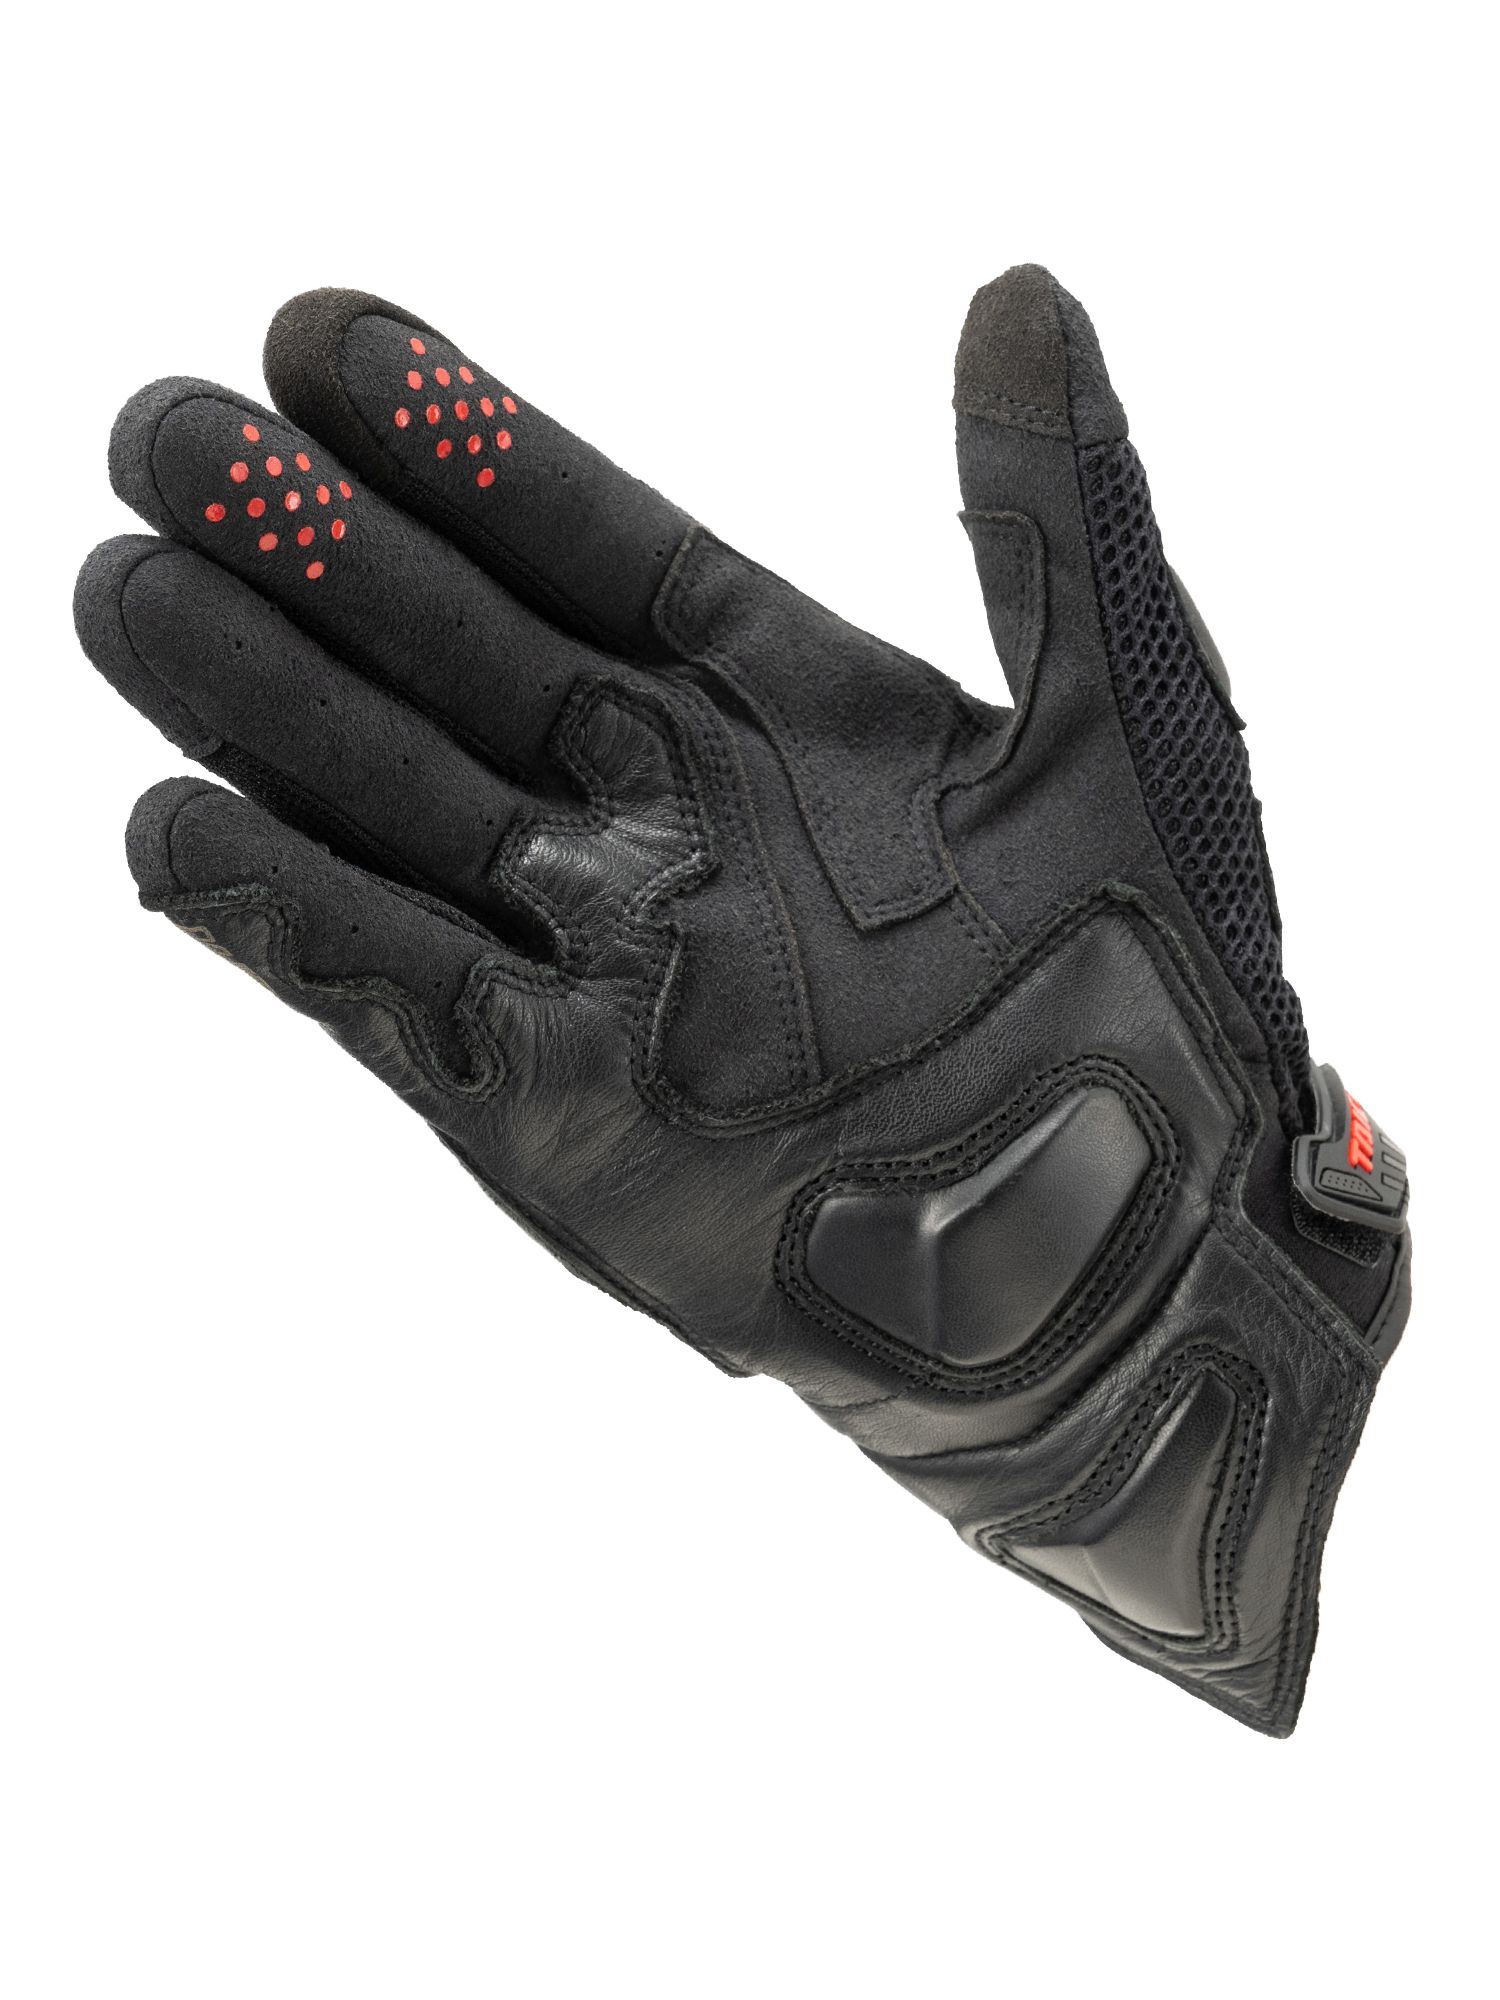 RST465｜WRX PRO AIR GLOVES［5colors］